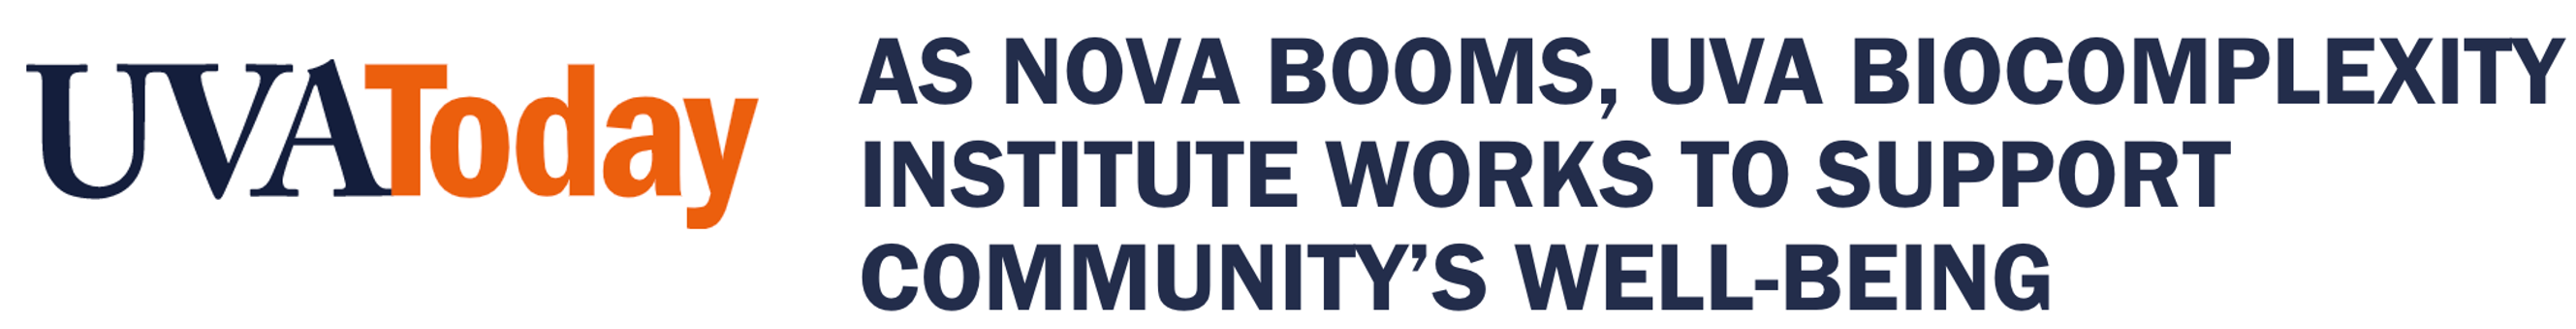 As NOVA Booms, UVA Biocomplexity Institute Works to Support Community’s Well-being, 2022 article published in UVA Today